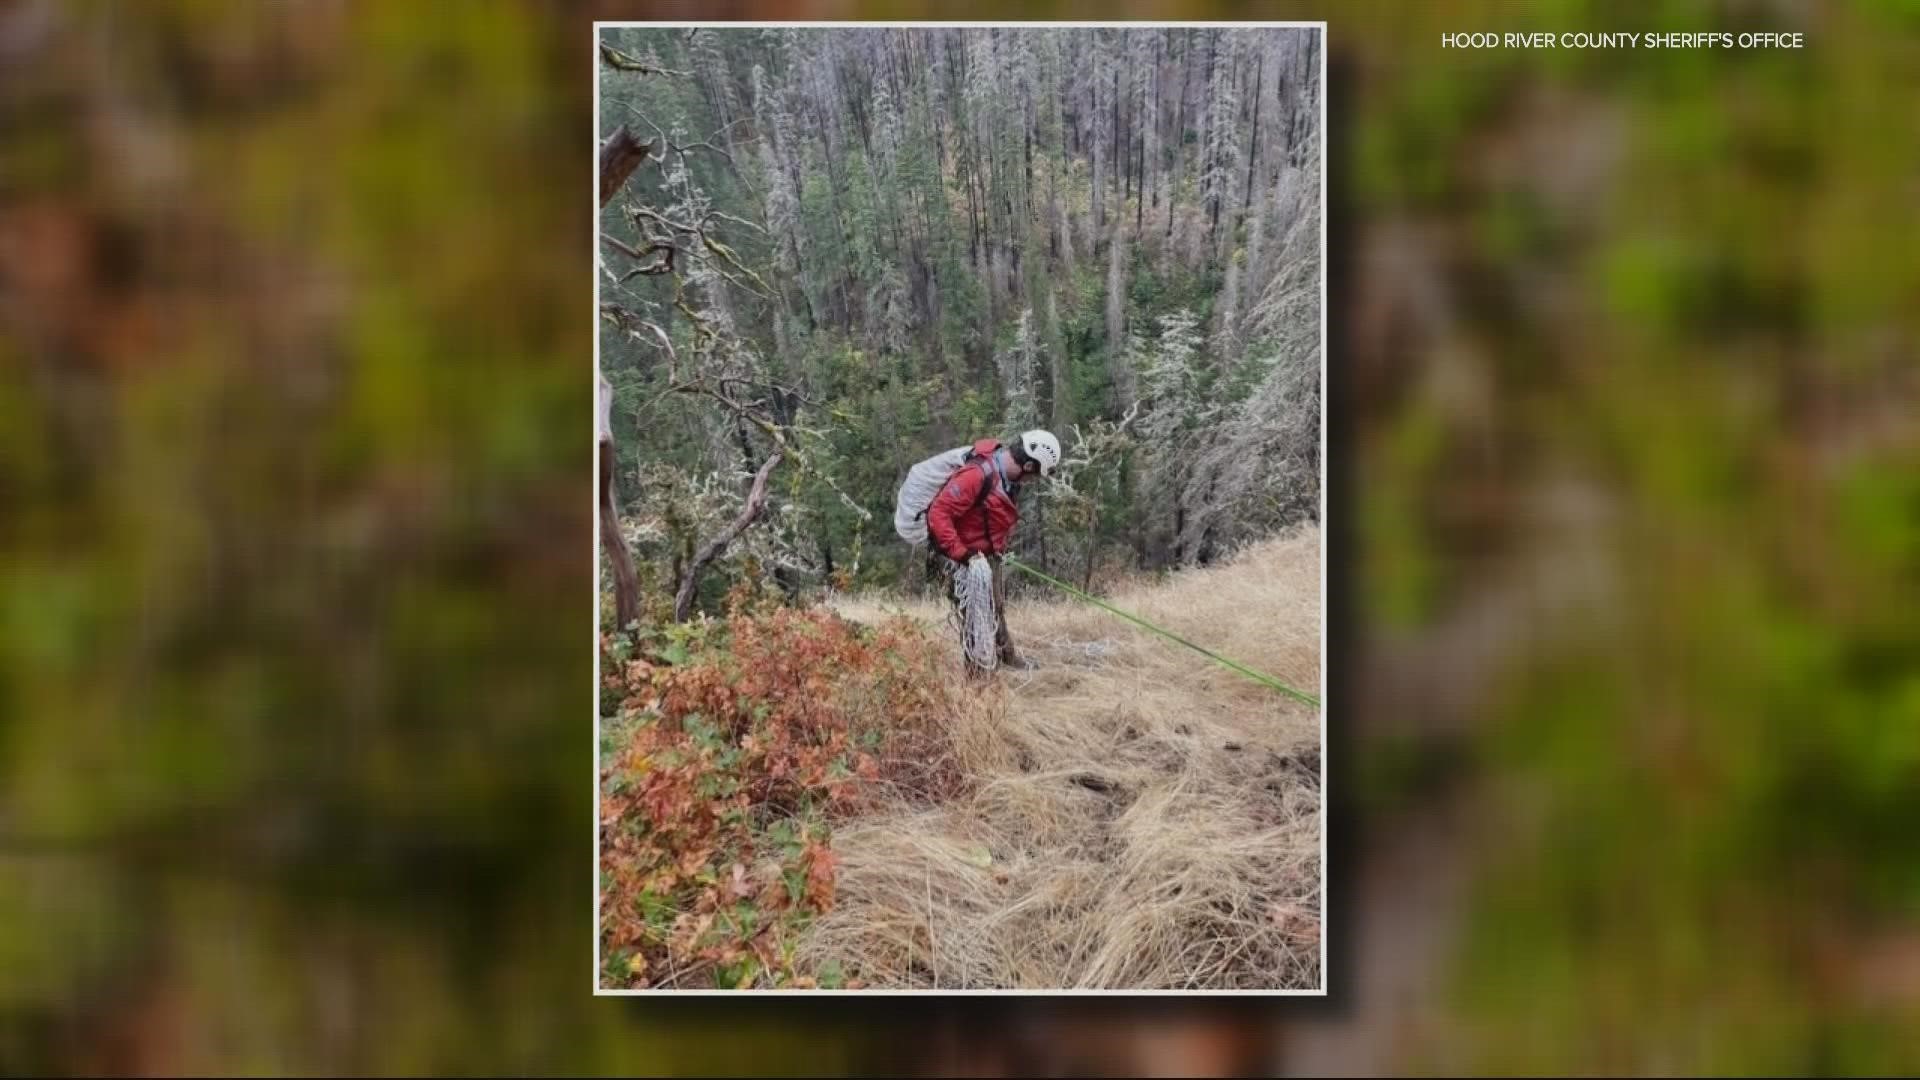 Search and rescue crews began searching for Nicholas Wells on Oct. 21 after his wife reported he didn't return home following a trail run on the Pacific Crest Trail.